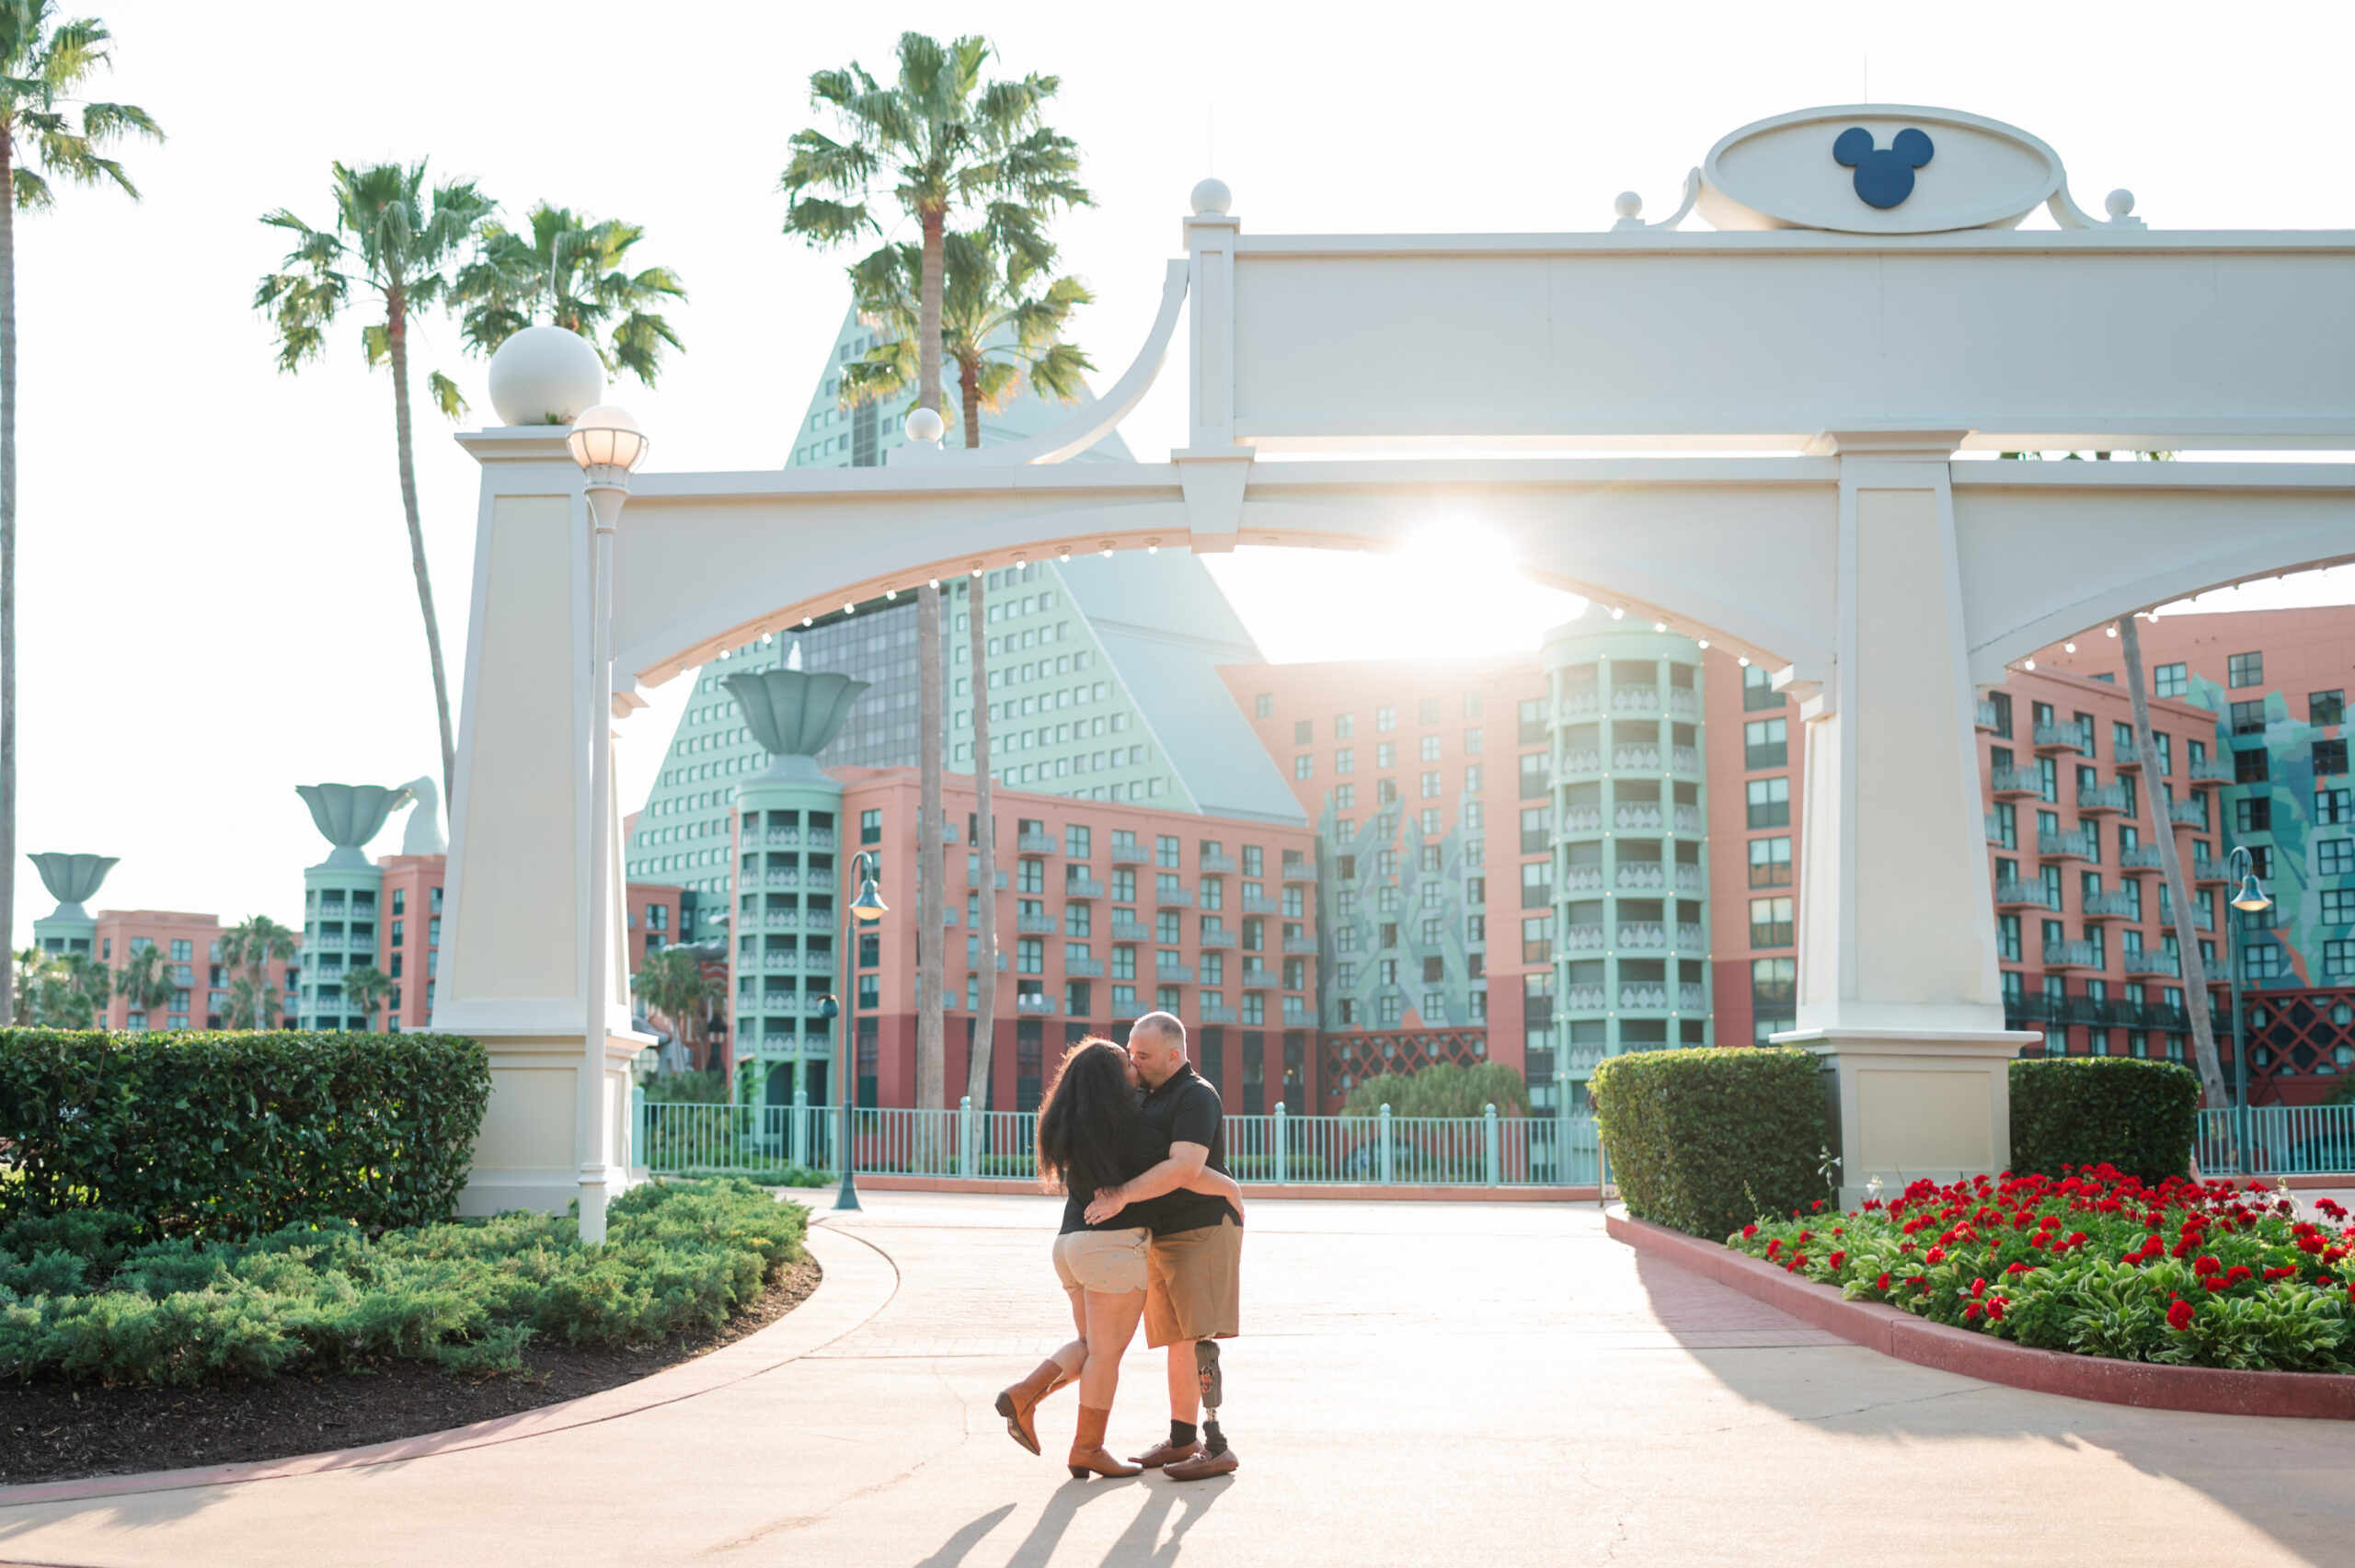 Bride and groom to be stand in front of Disney's Dolphin Resort at the Boardwalk with the sun peeking through the palm trees and Mickey Ear archway